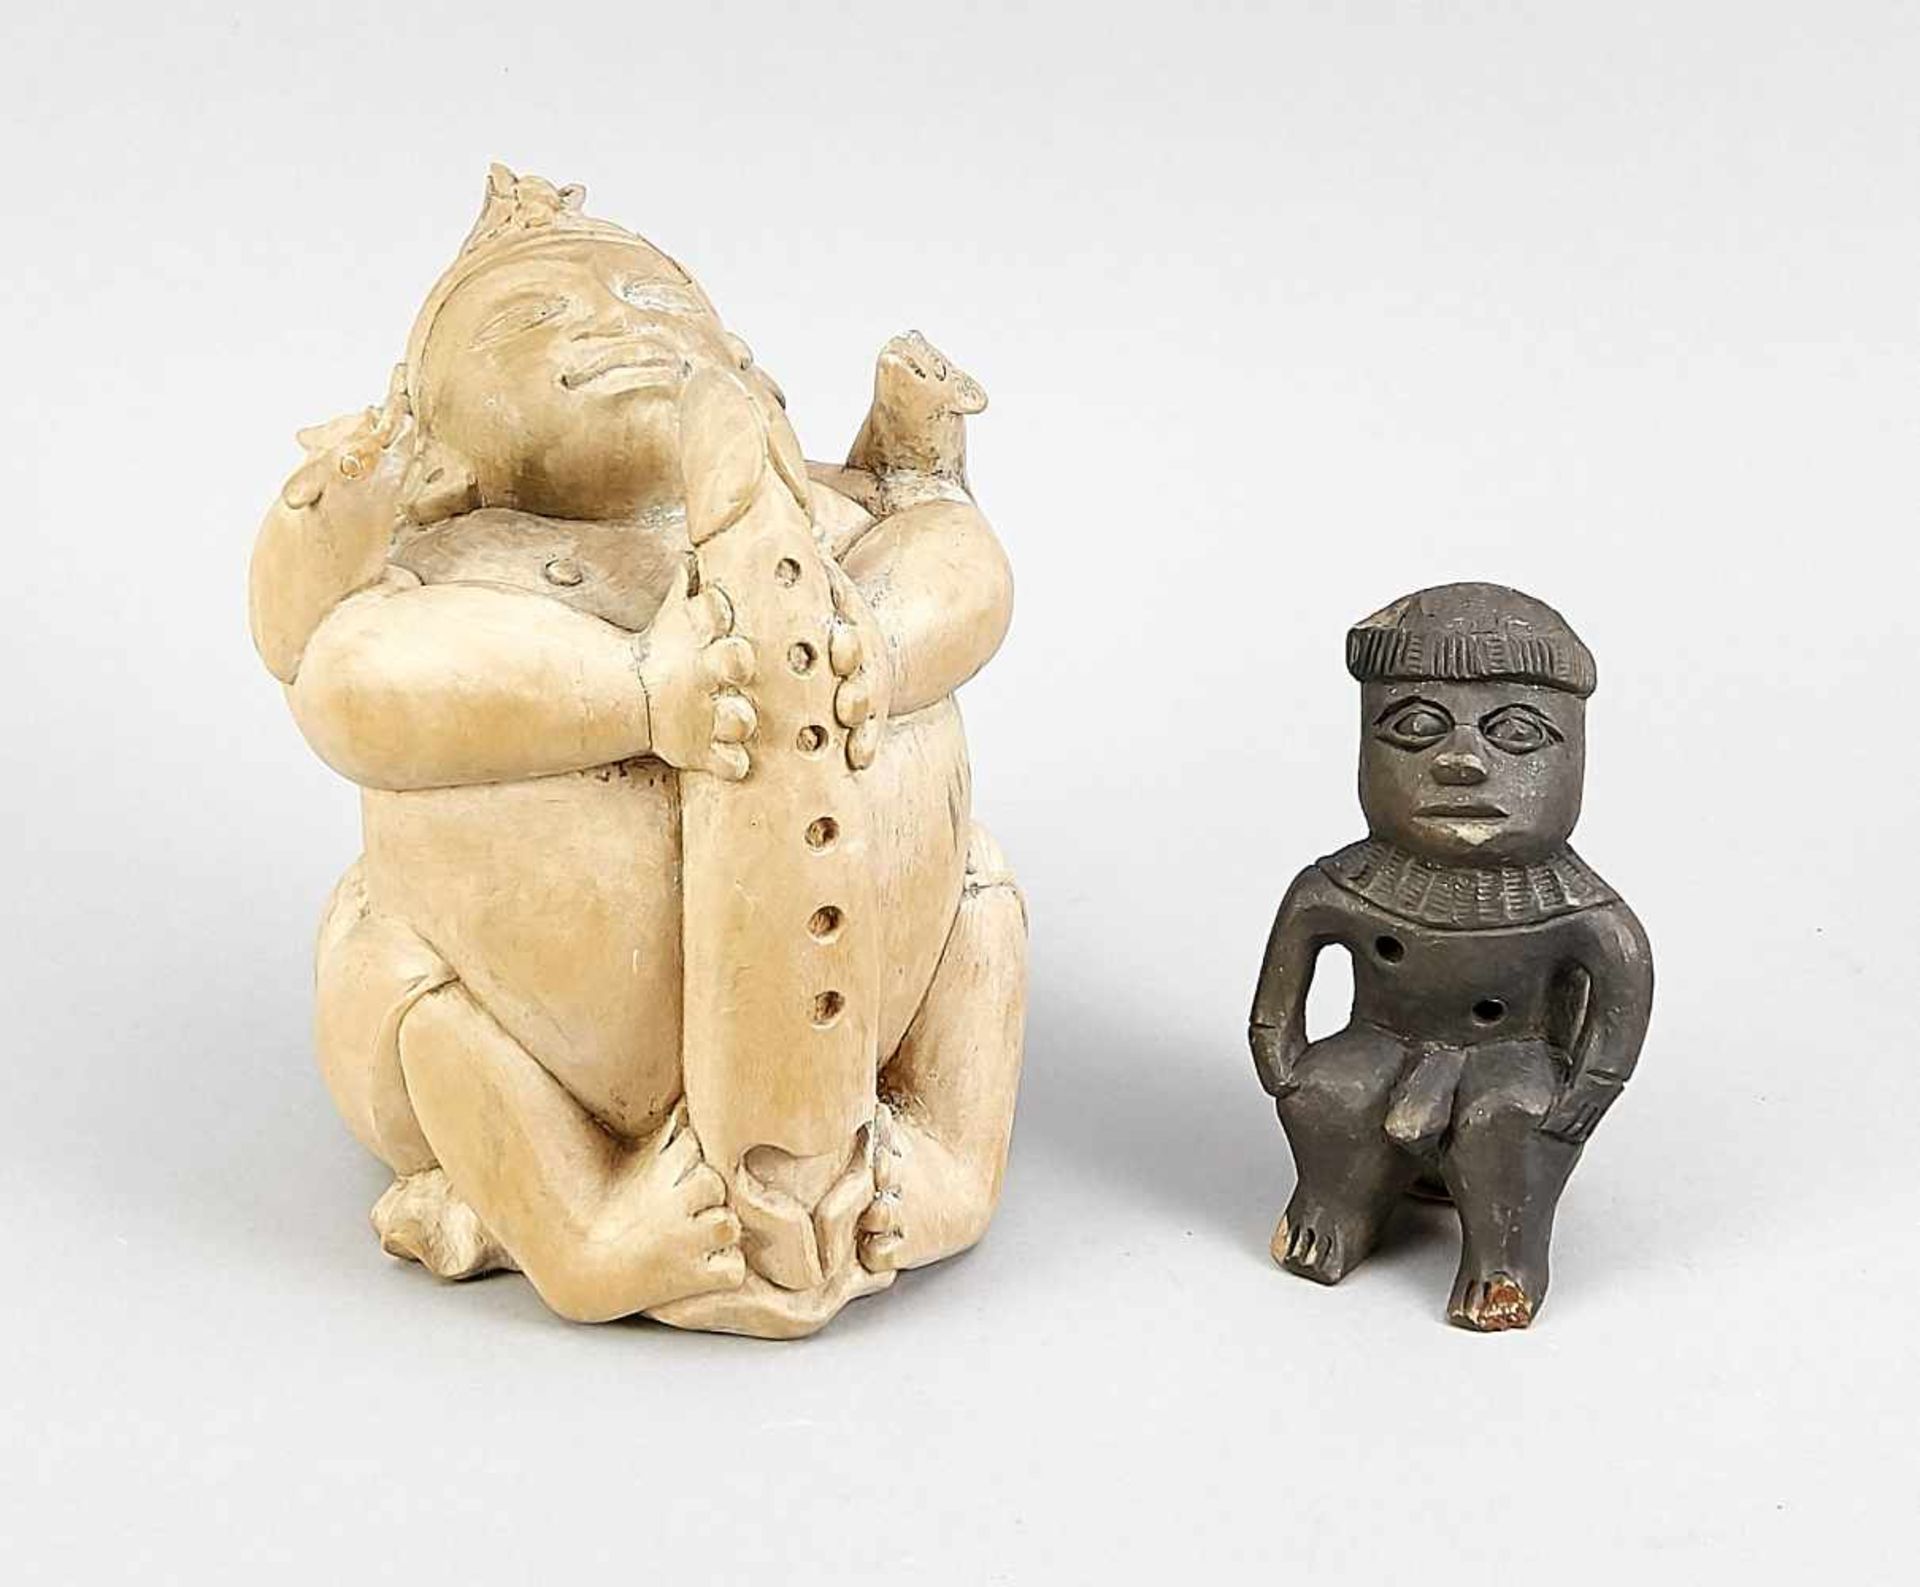 Two figures, Mexico, 20th century, wood, carved, abraded, bumped, drying crack, h. 21.5